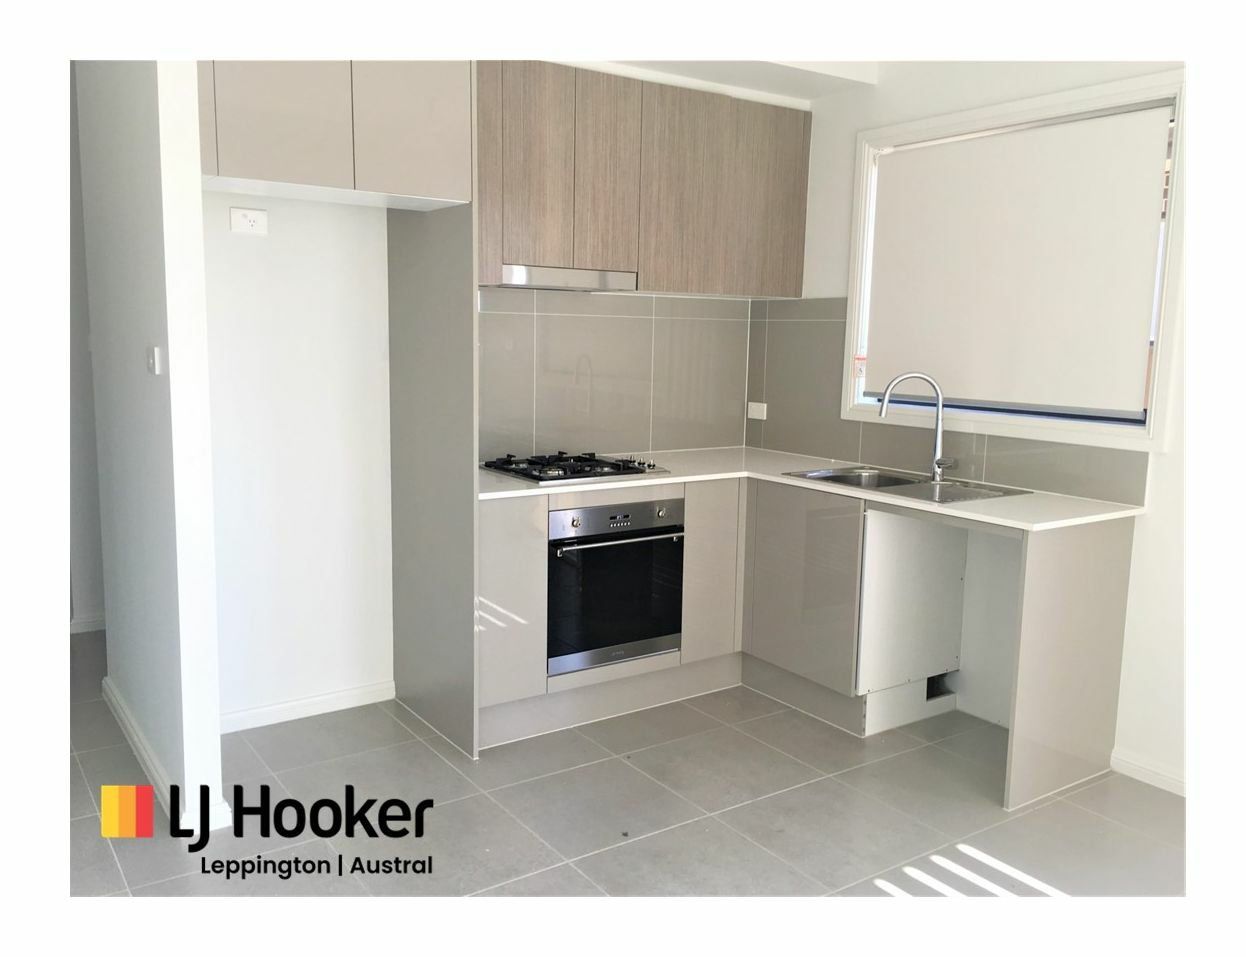 1 bedrooms Apartment / Unit / Flat in 37A Crystal Palace Way LEPPINGTON NSW, 2179